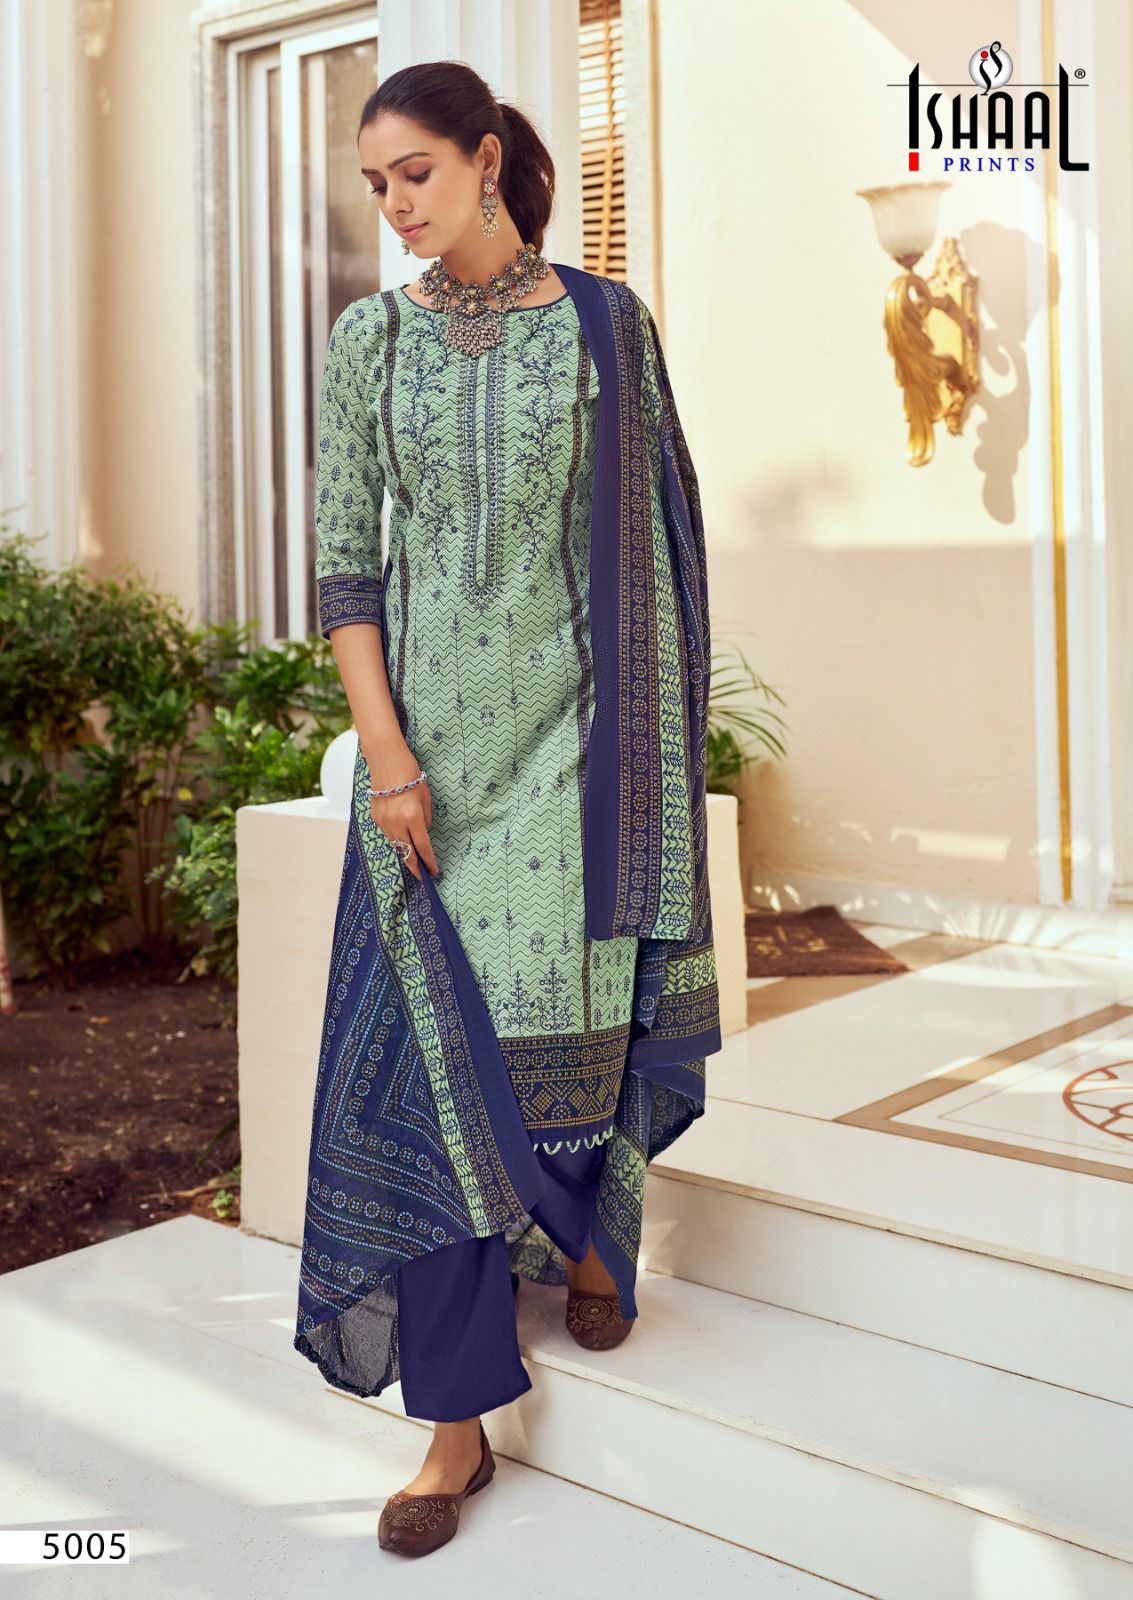 Ishaal Print Embroidered Vol  5 collection 5